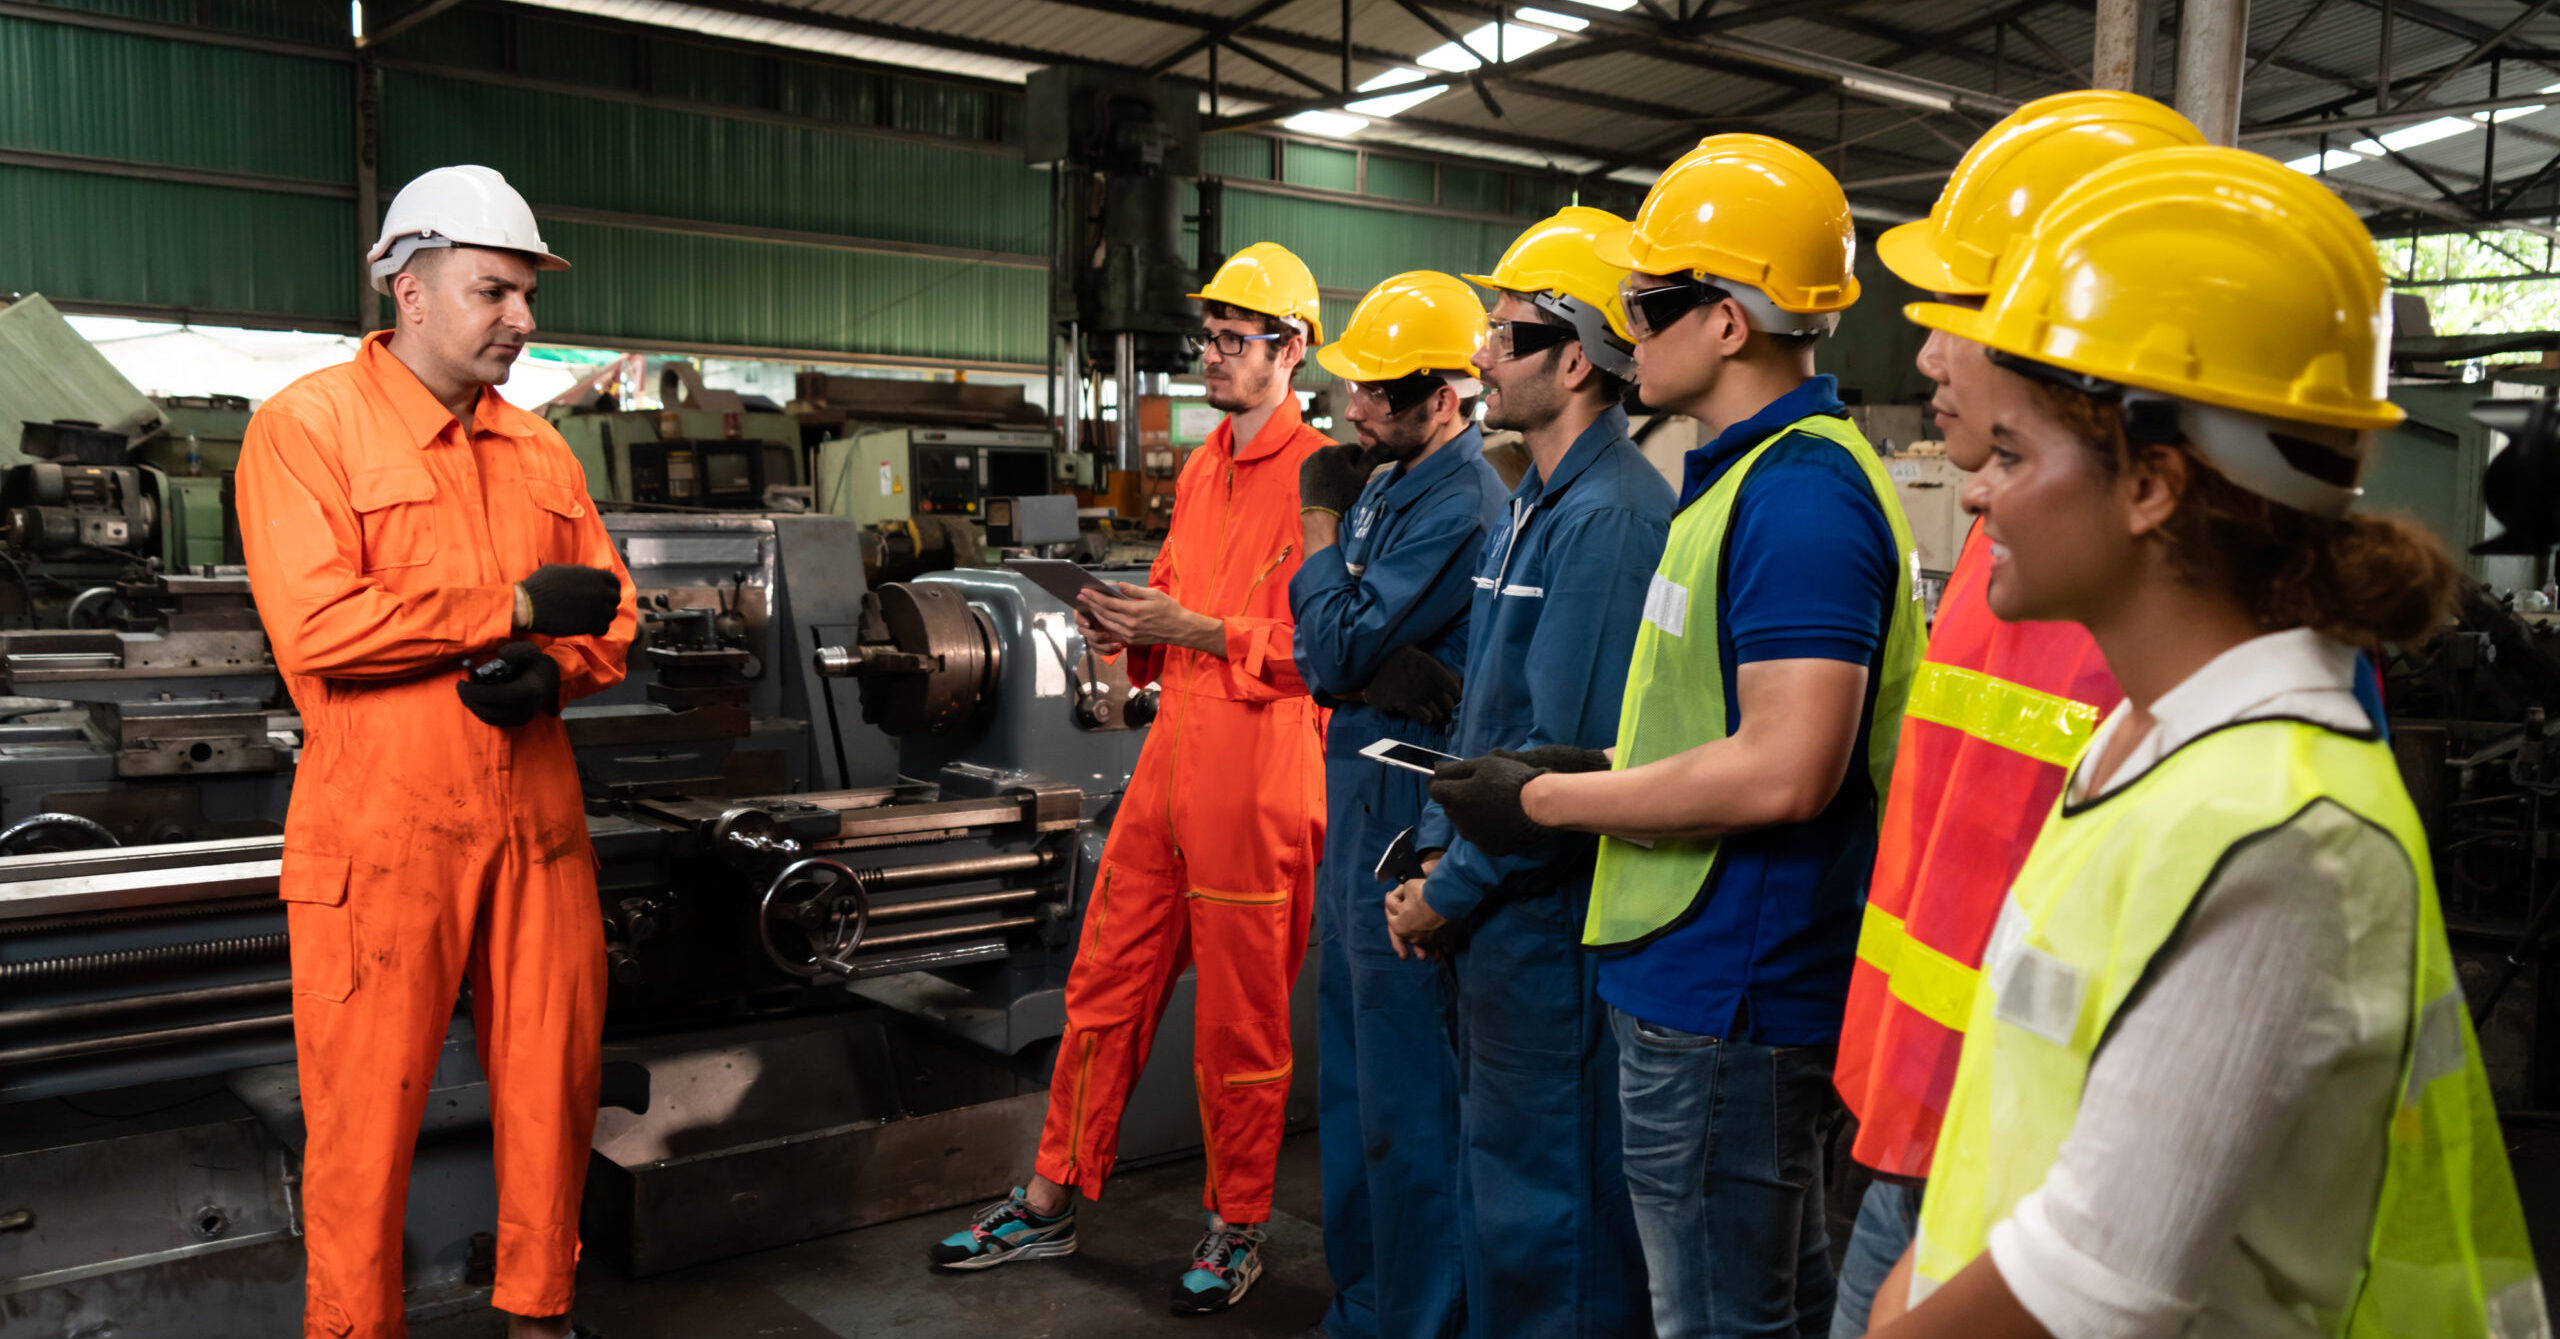 A group of workers listening to a safety talk